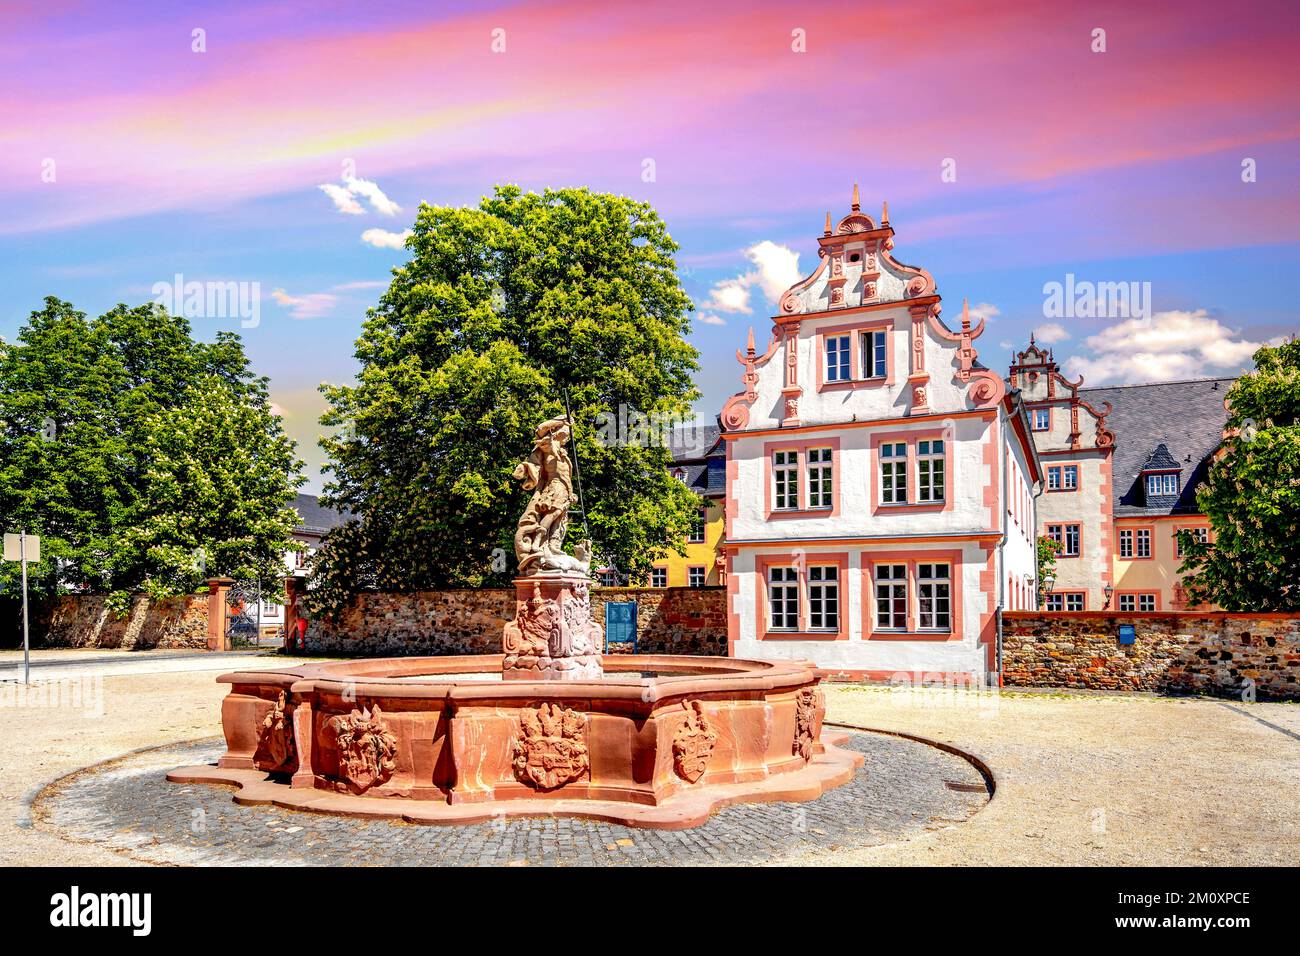 Old Town Friedberg, Hessen, Germany Stock Photo